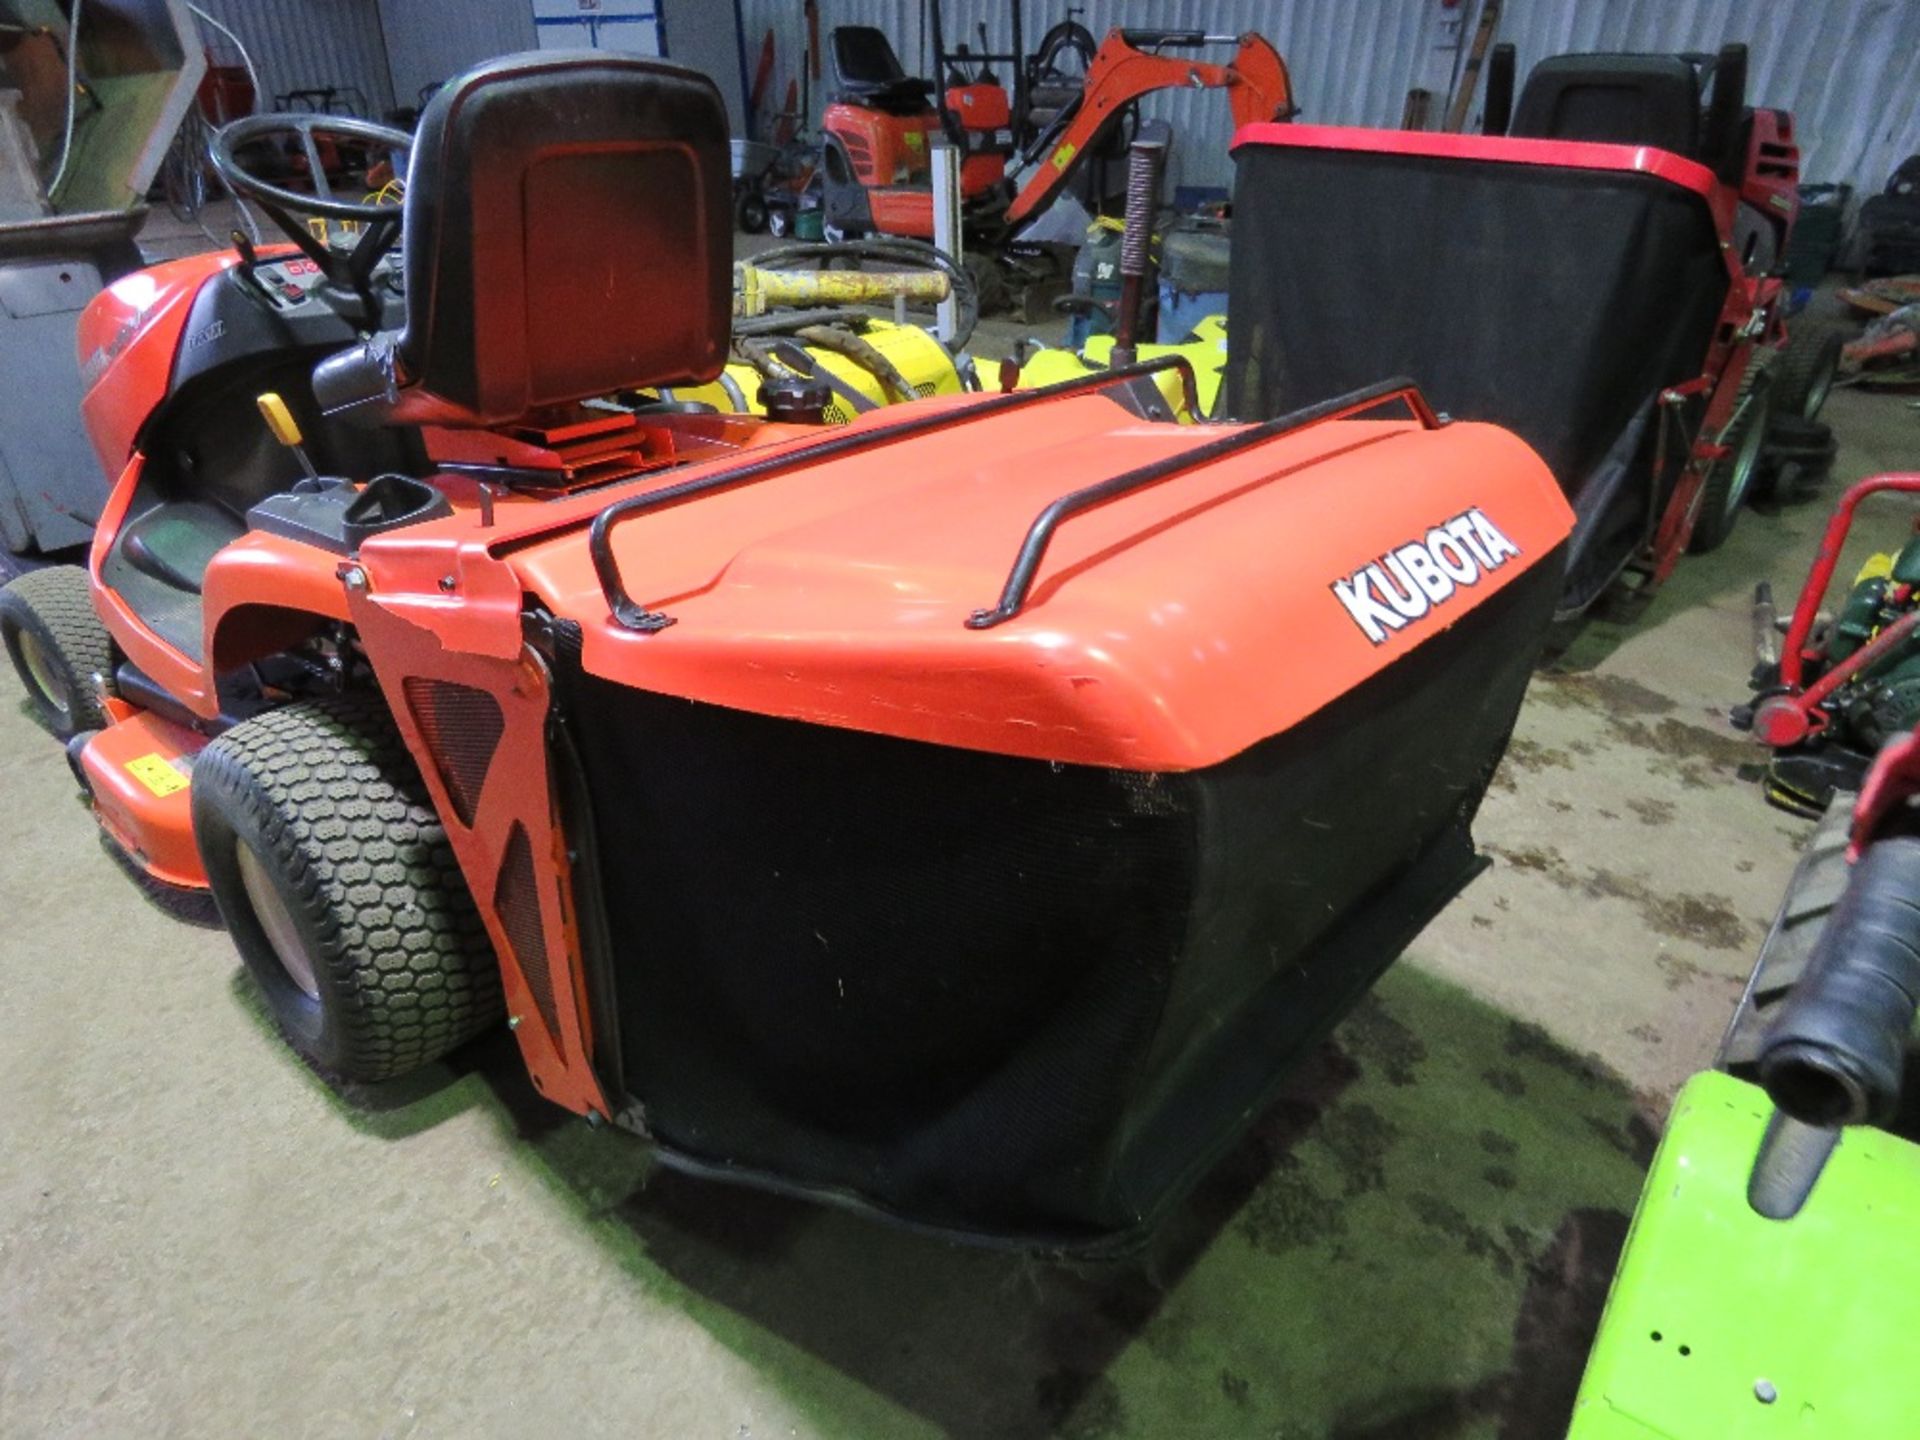 KUBOTA GR1600-II DIESEL RIDE ON MOWER WITH REAR COLLECTOR PLUS DISCHARGE CHUTE. SN:30142. WHEN TESTE - Image 5 of 14